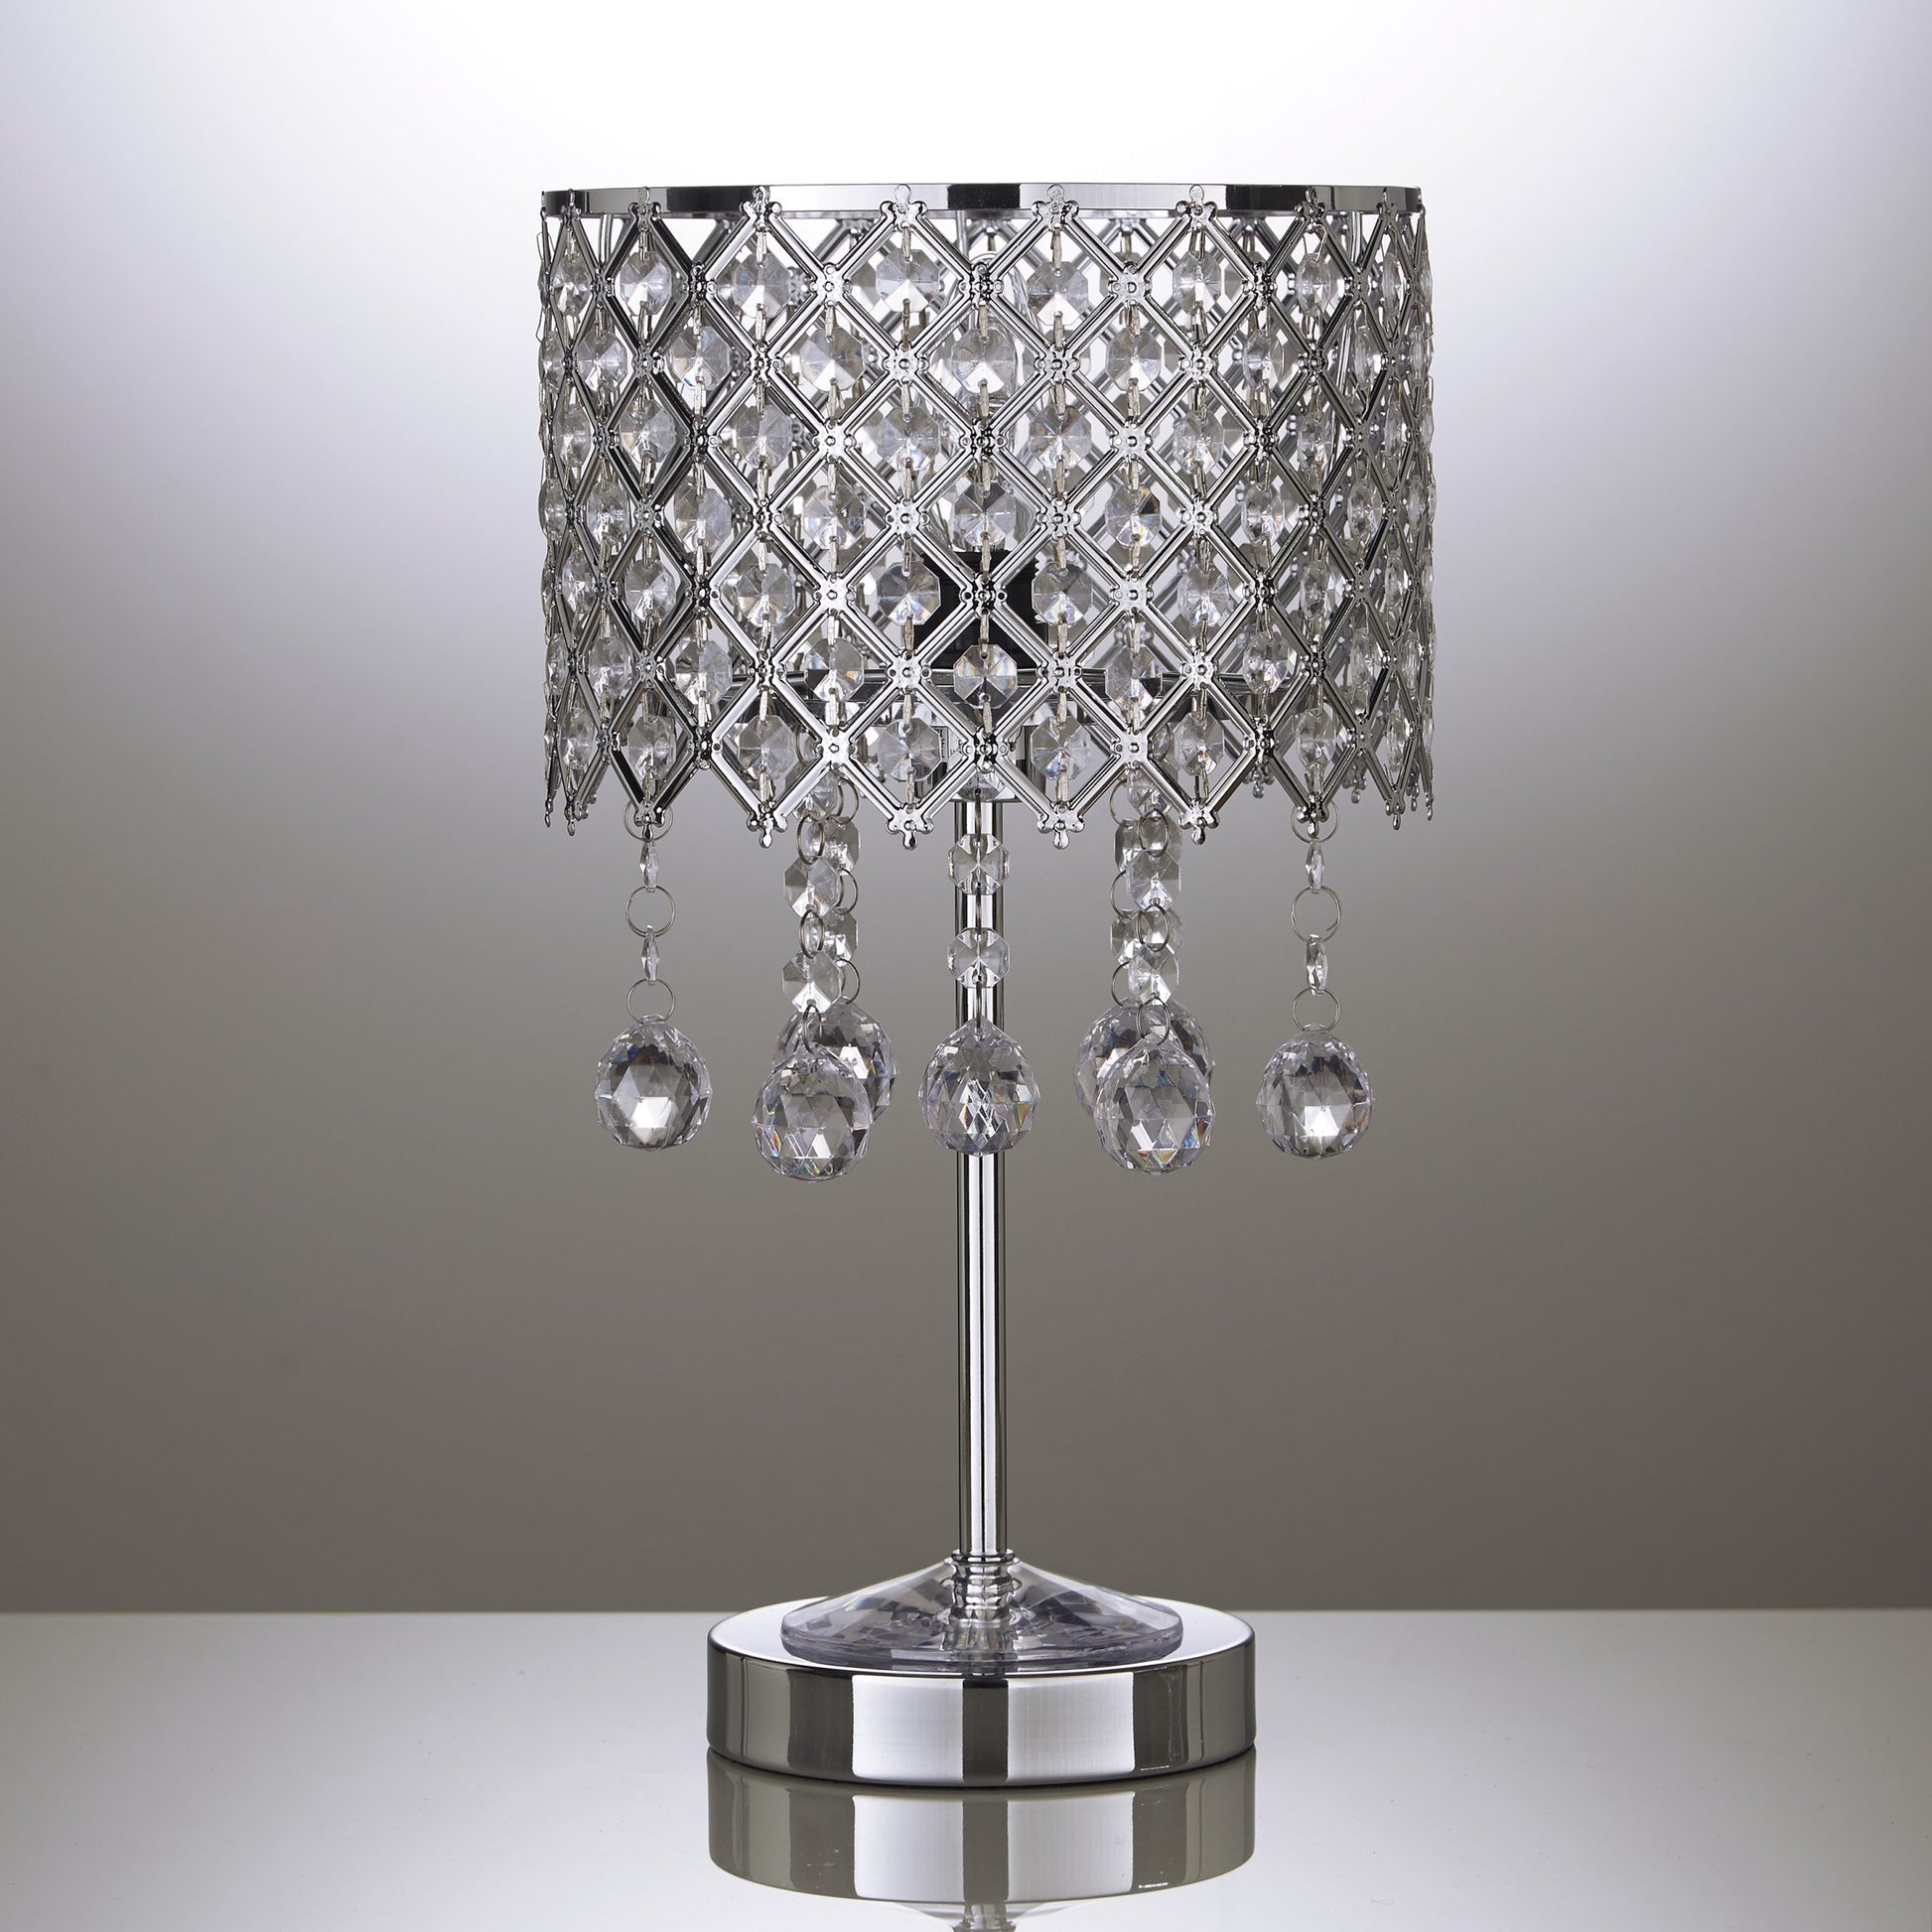 Silver Chrome Metal Table Lamp with Beaded Droplets and Beaded Lamps Shade